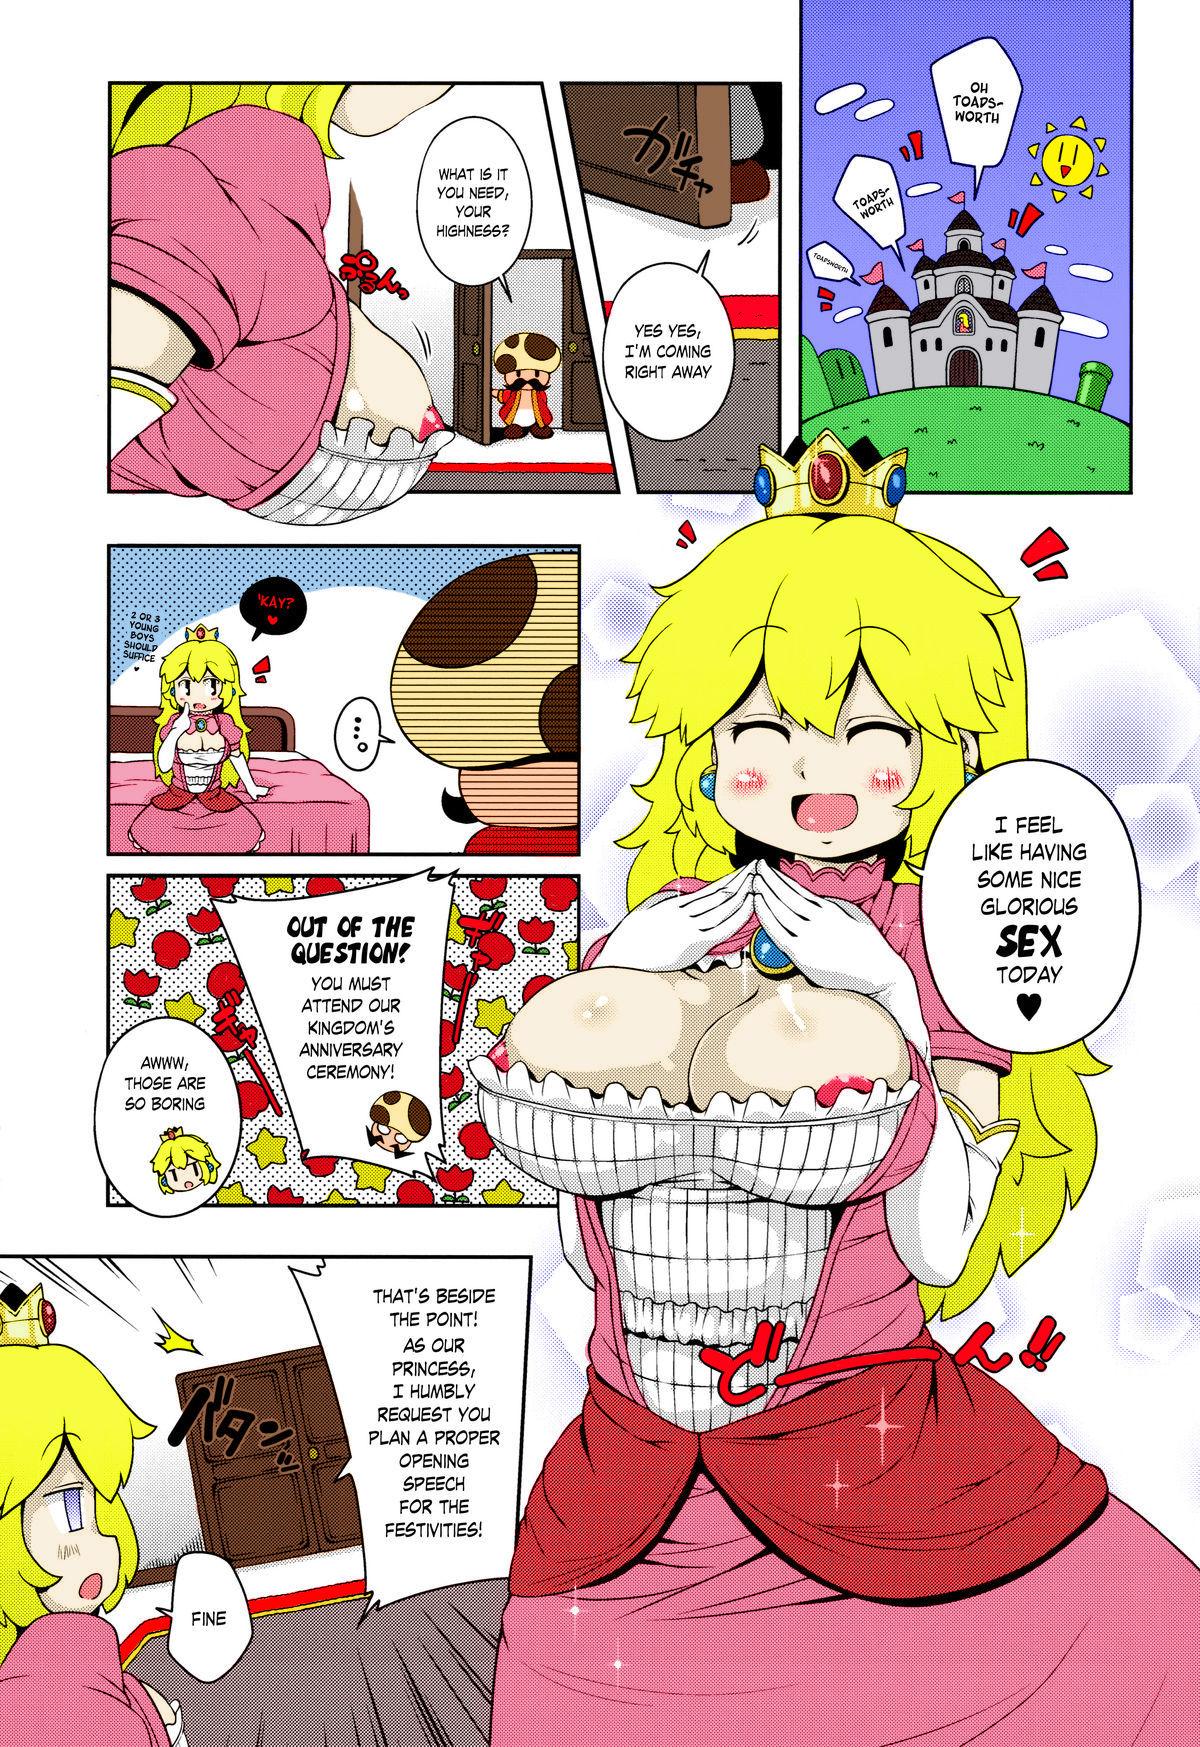 Sharing SUPER BITCH WORLD - Super mario brothers Chicks - Page 2